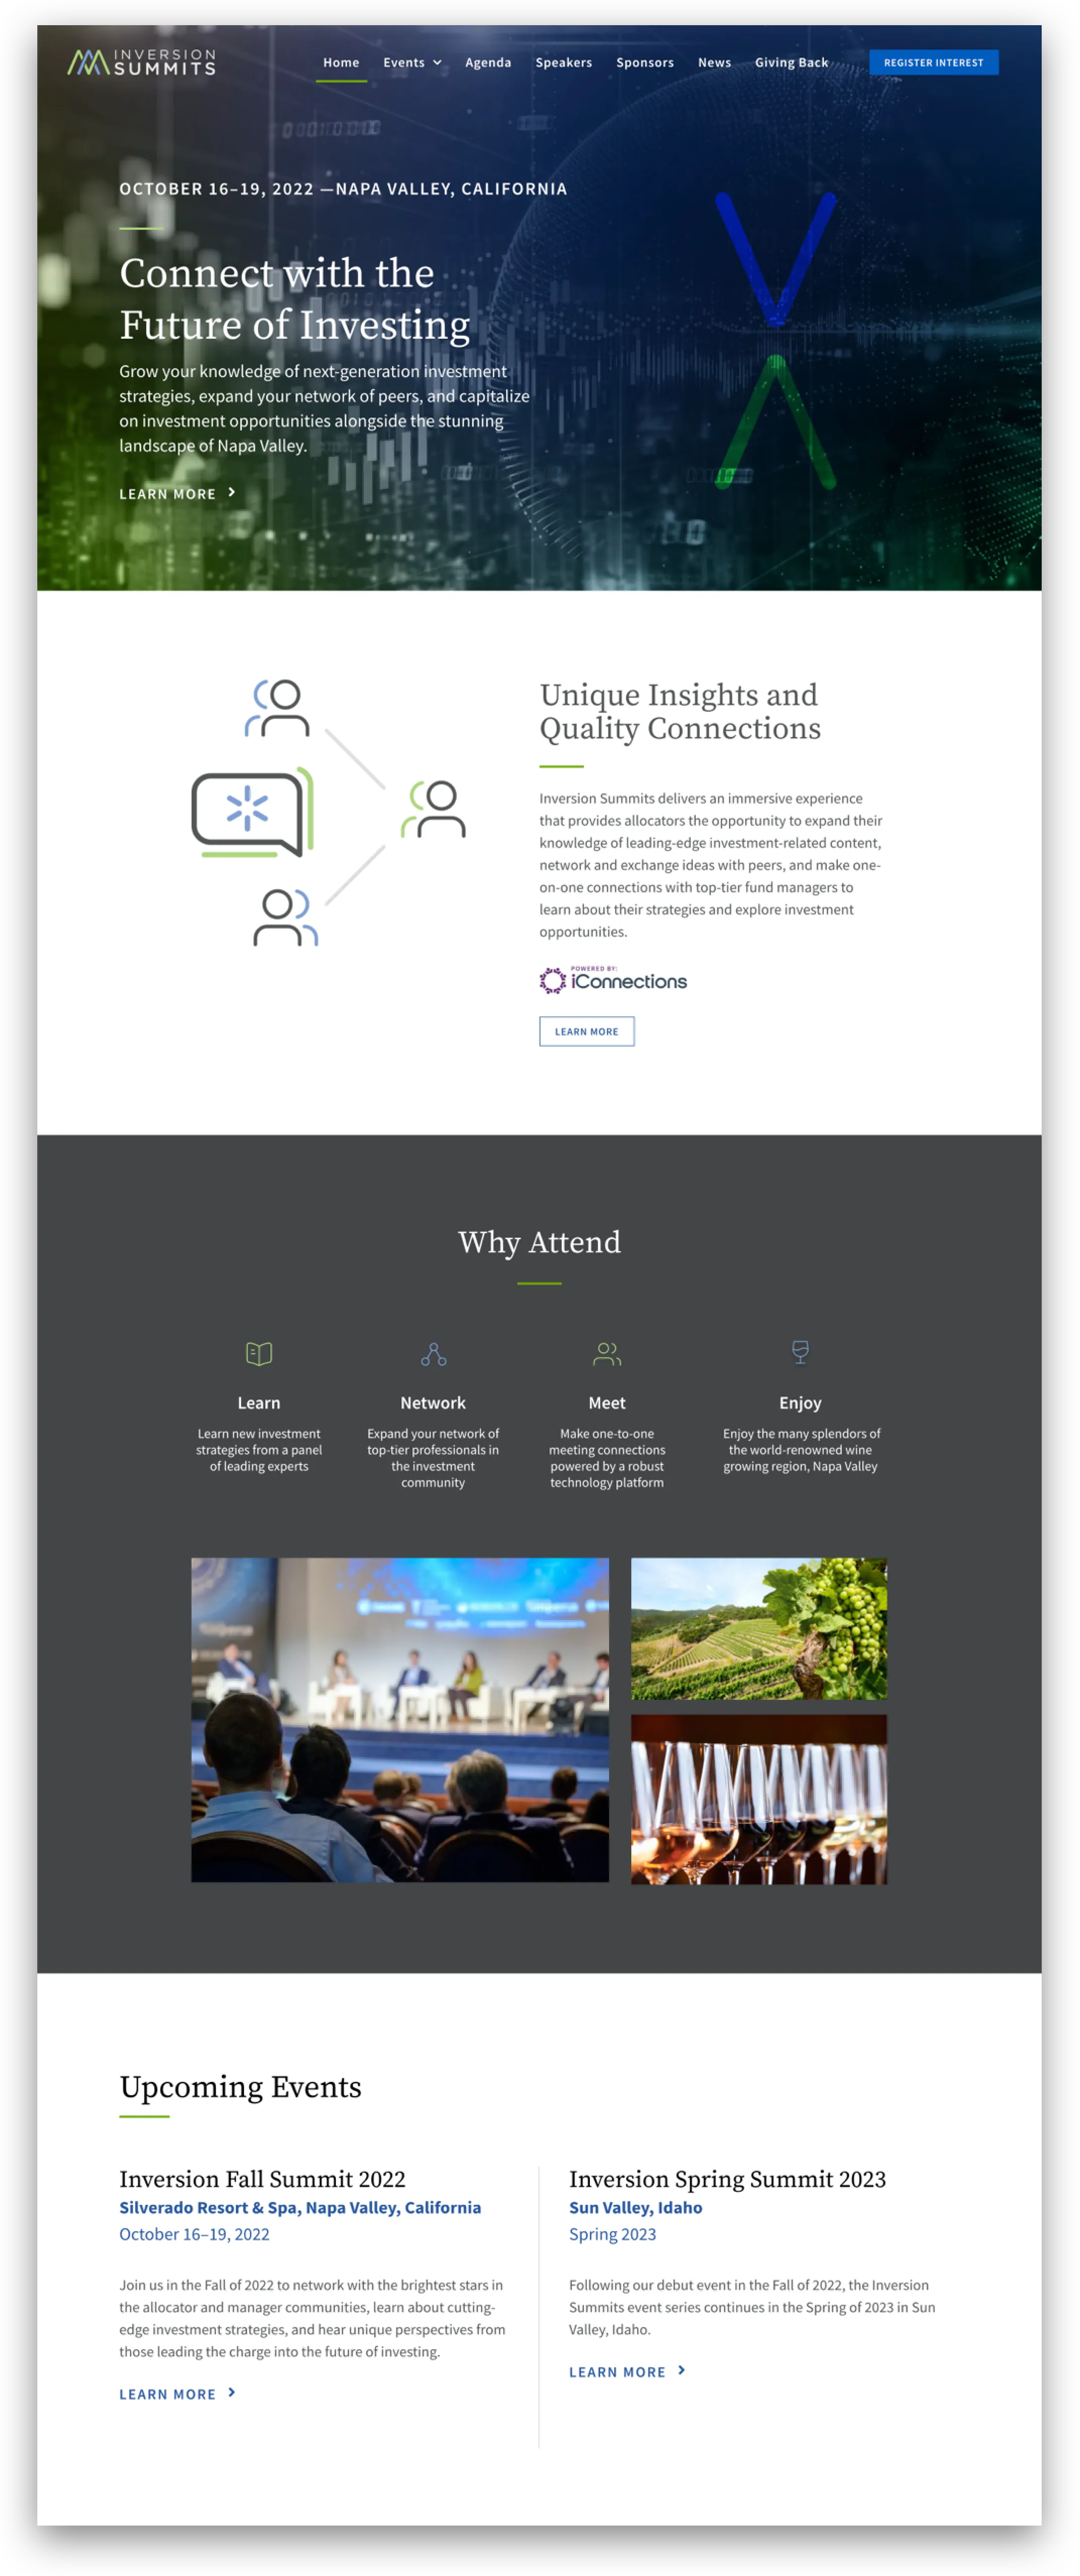 Image of Inversion Summits website homepage